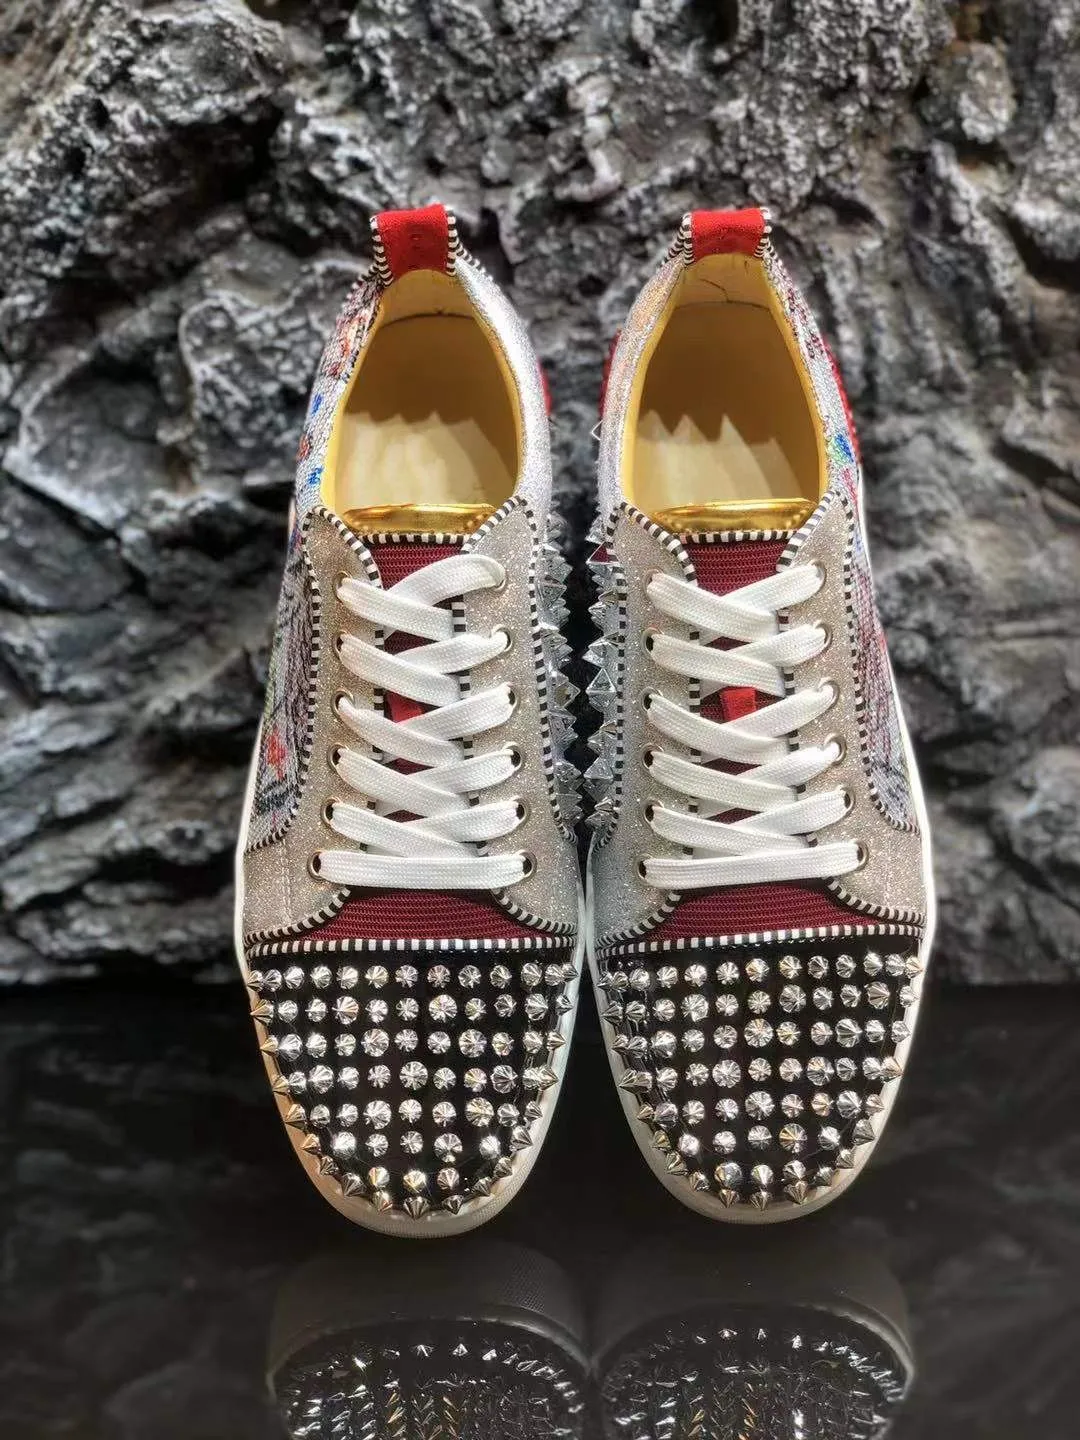 Red bottoms shoes for men Fashion Summer Mens shoes casual Male sneakers  Flat Dress trainers Luxury designer shoes knight spiked - AliExpress